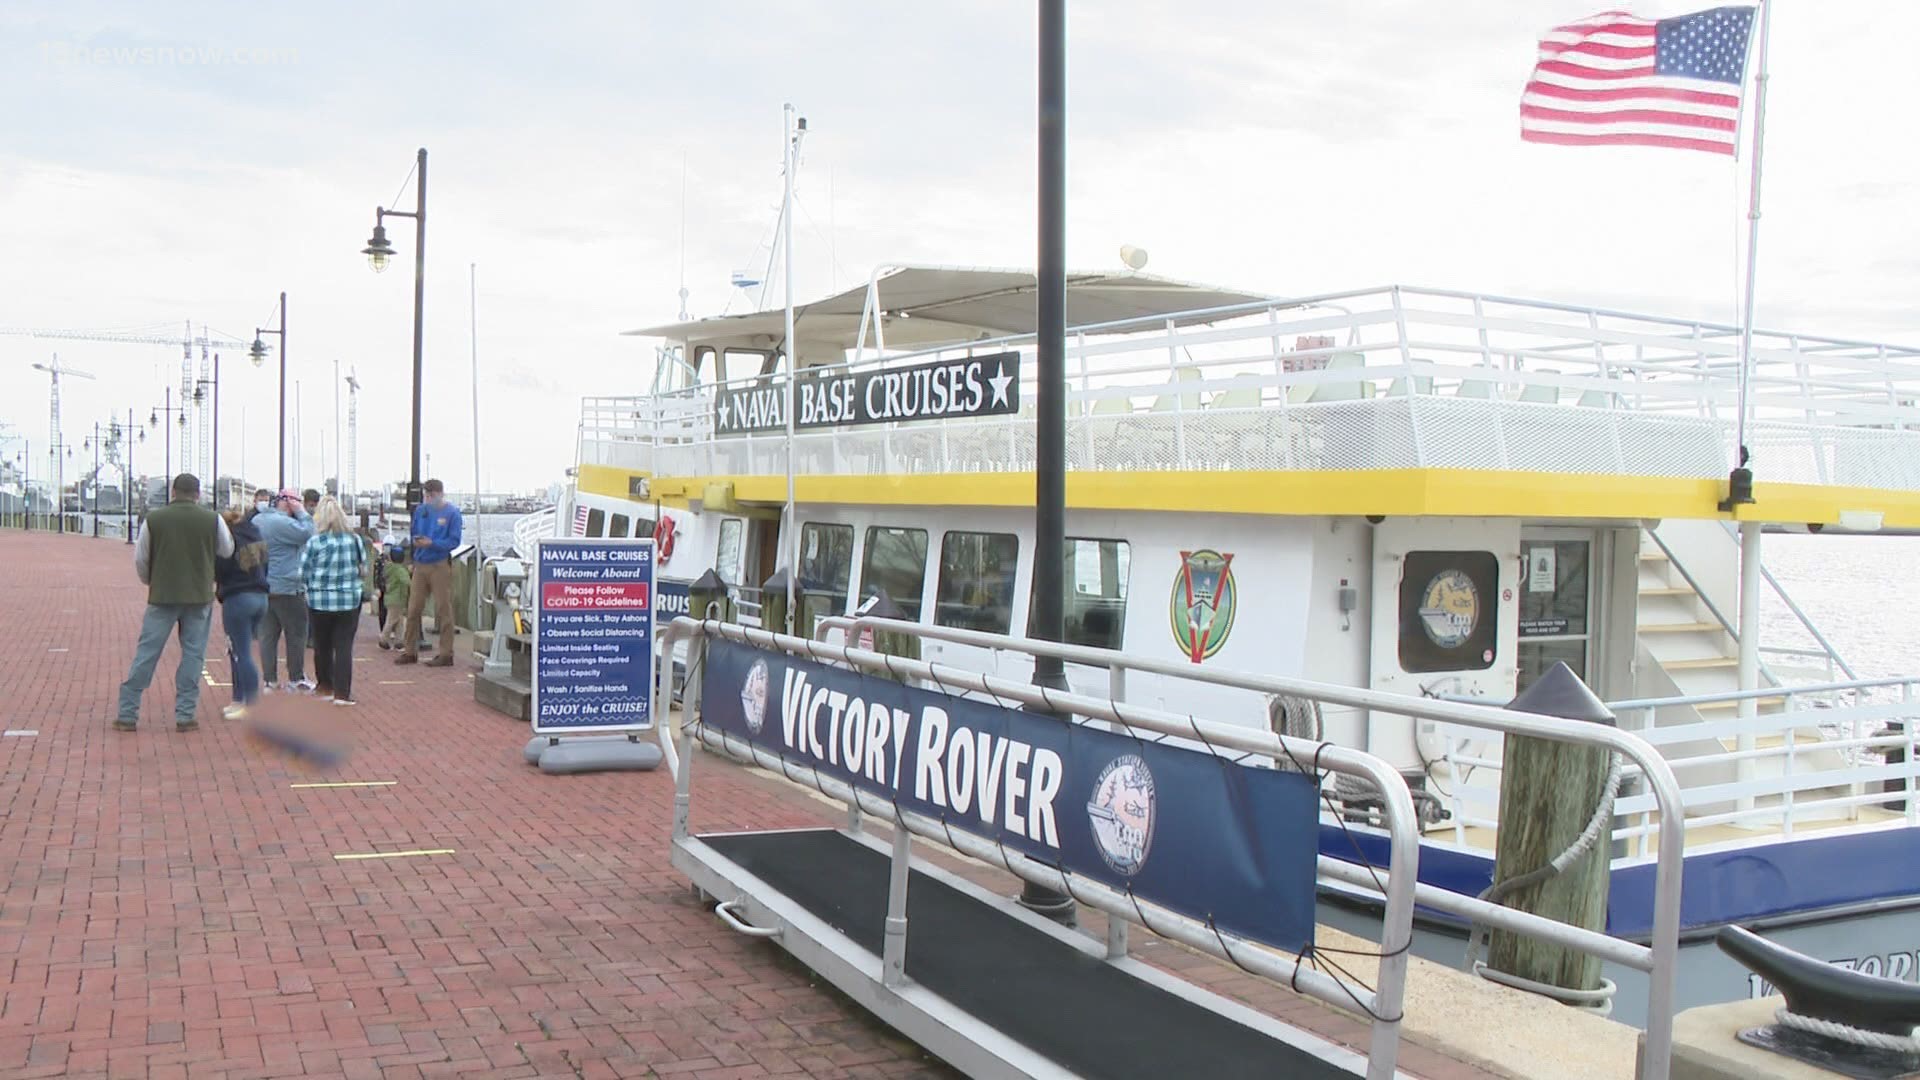 The Victory Rover Naval Base Cruises are taking place every day except Monday at 2 p.m. from the dock at Nauticus in Downtown Norfolk